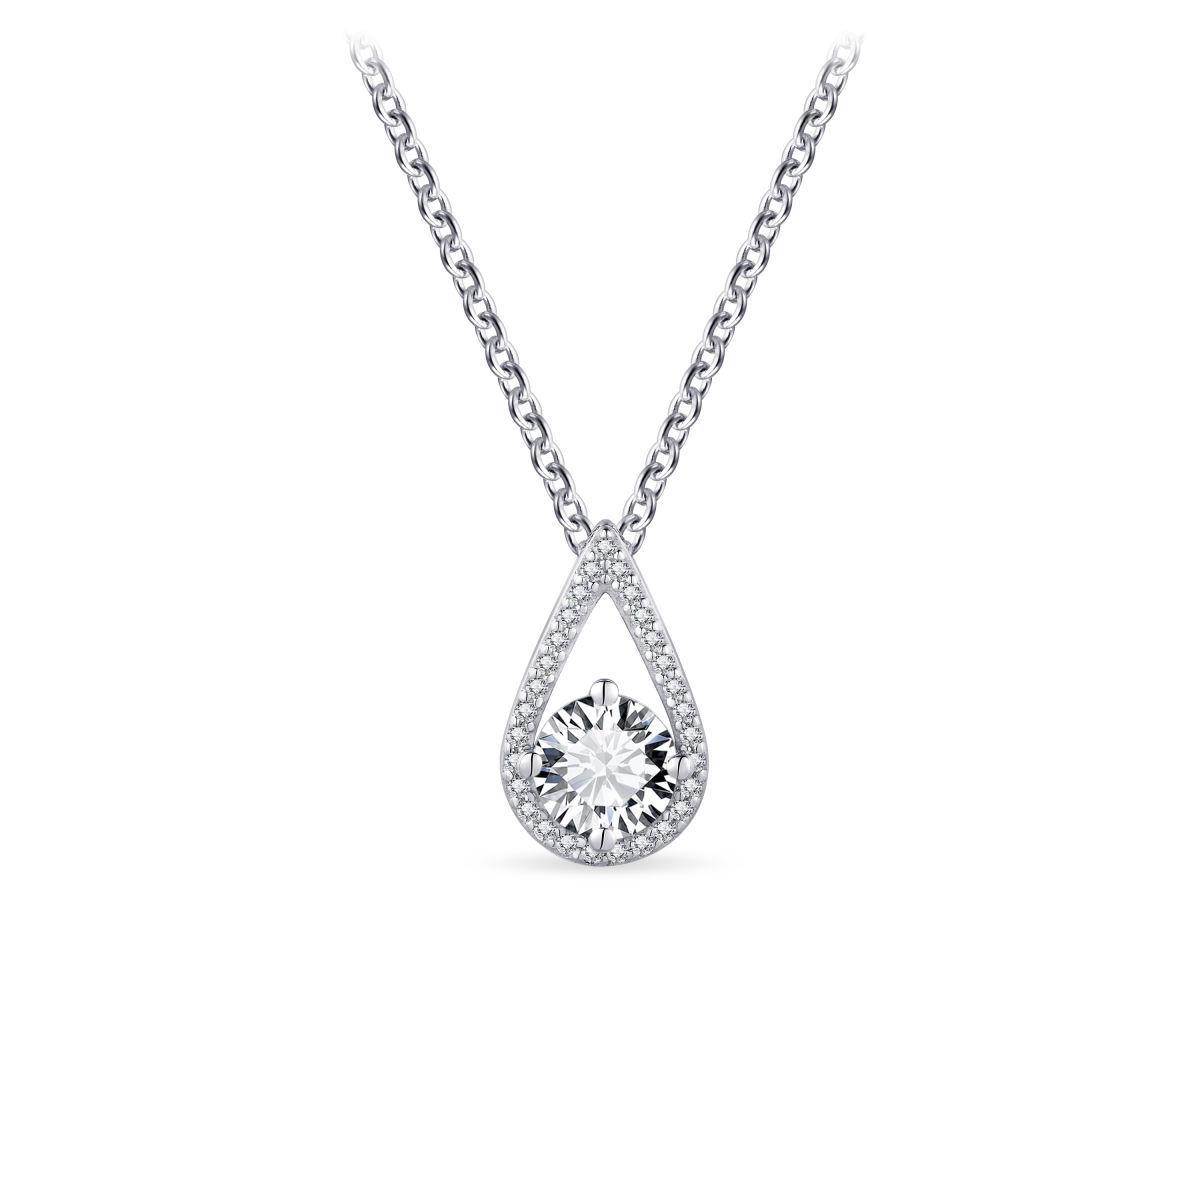 Silver Pear Solitaire Shaped Pendant Necklace with Cubic Zirconia - Rococo Jewellery